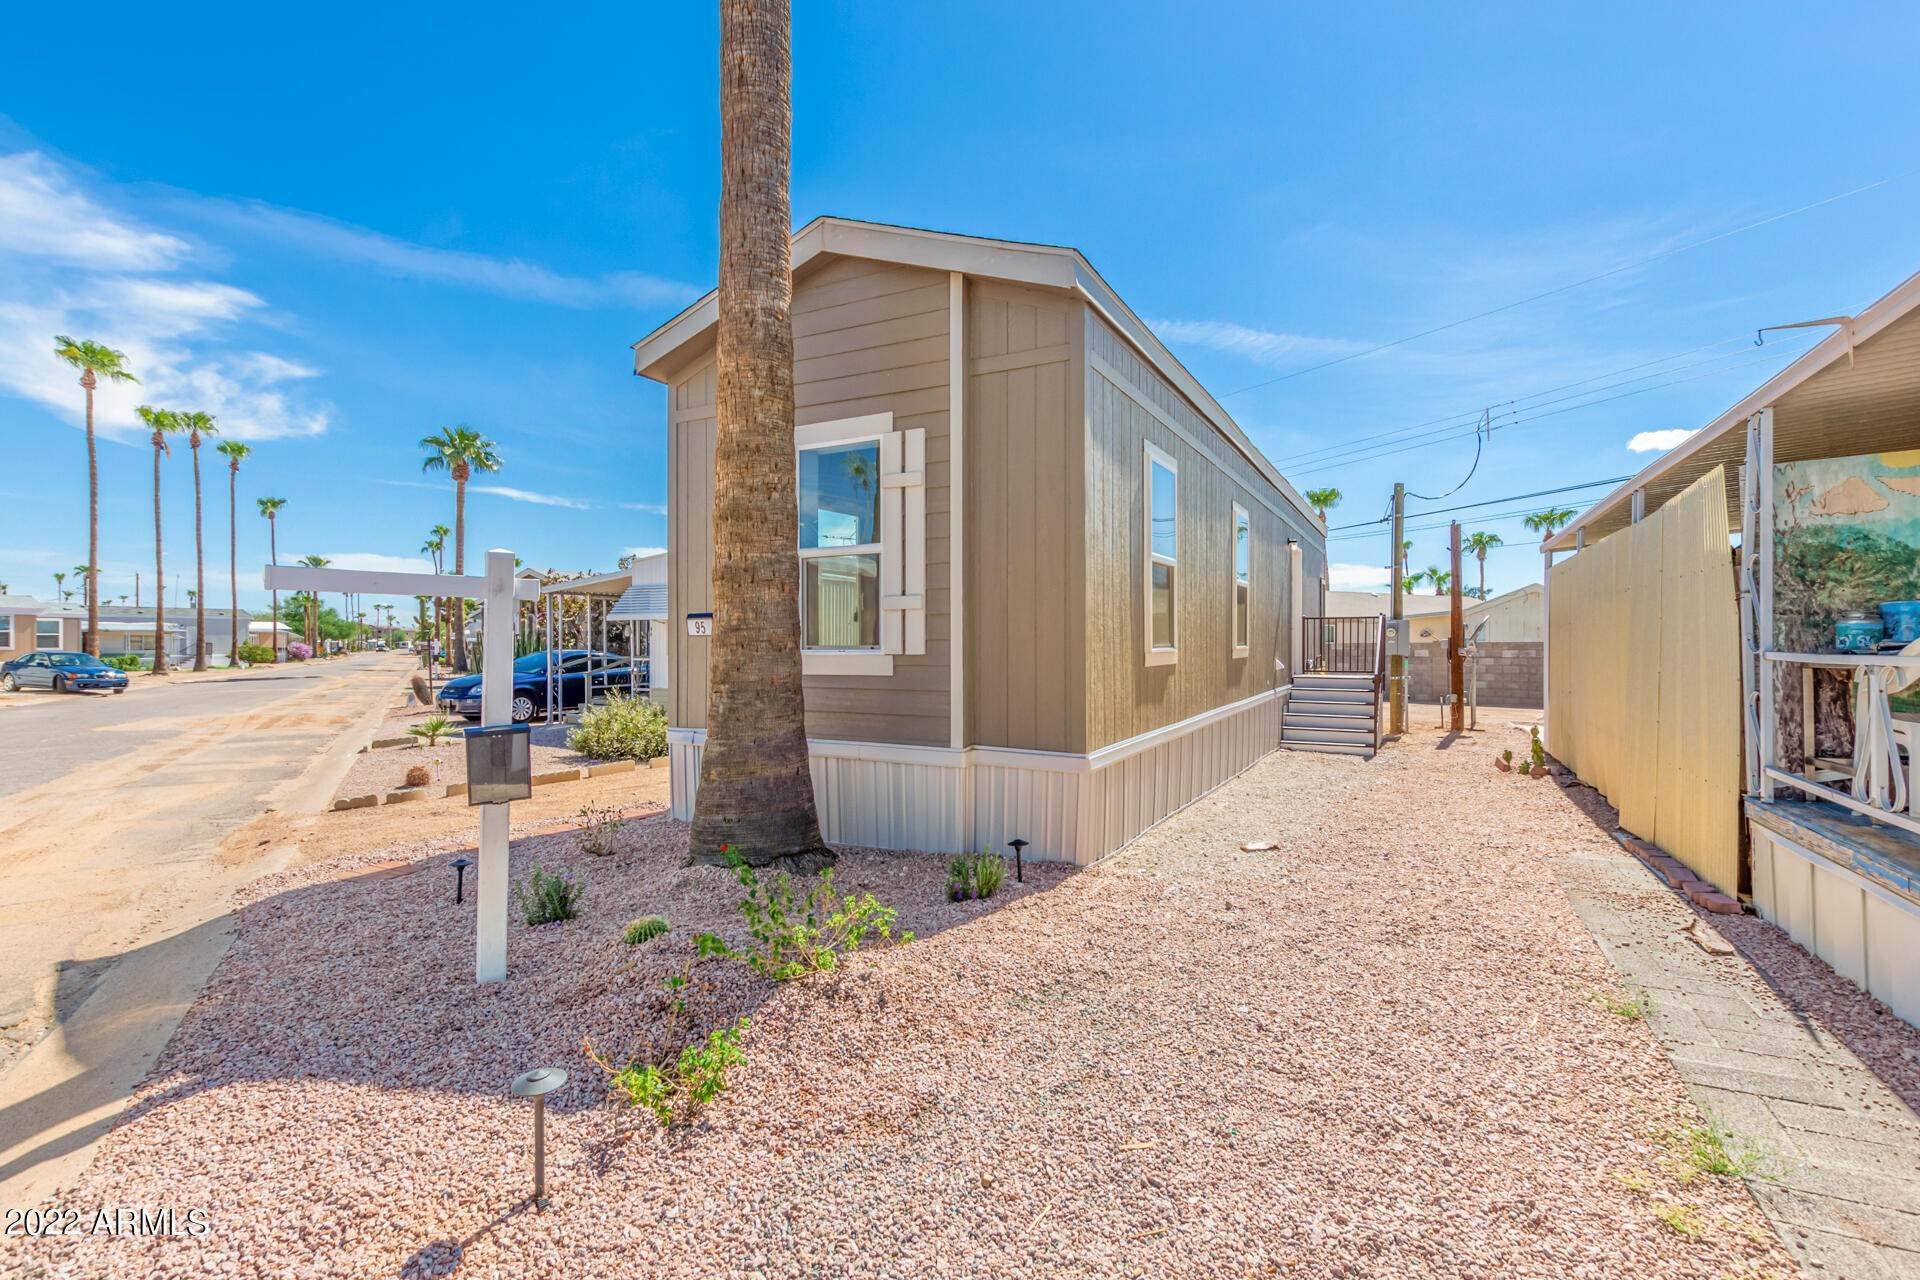 14. Manufactured Home for Sale at Mesa, AZ 85207